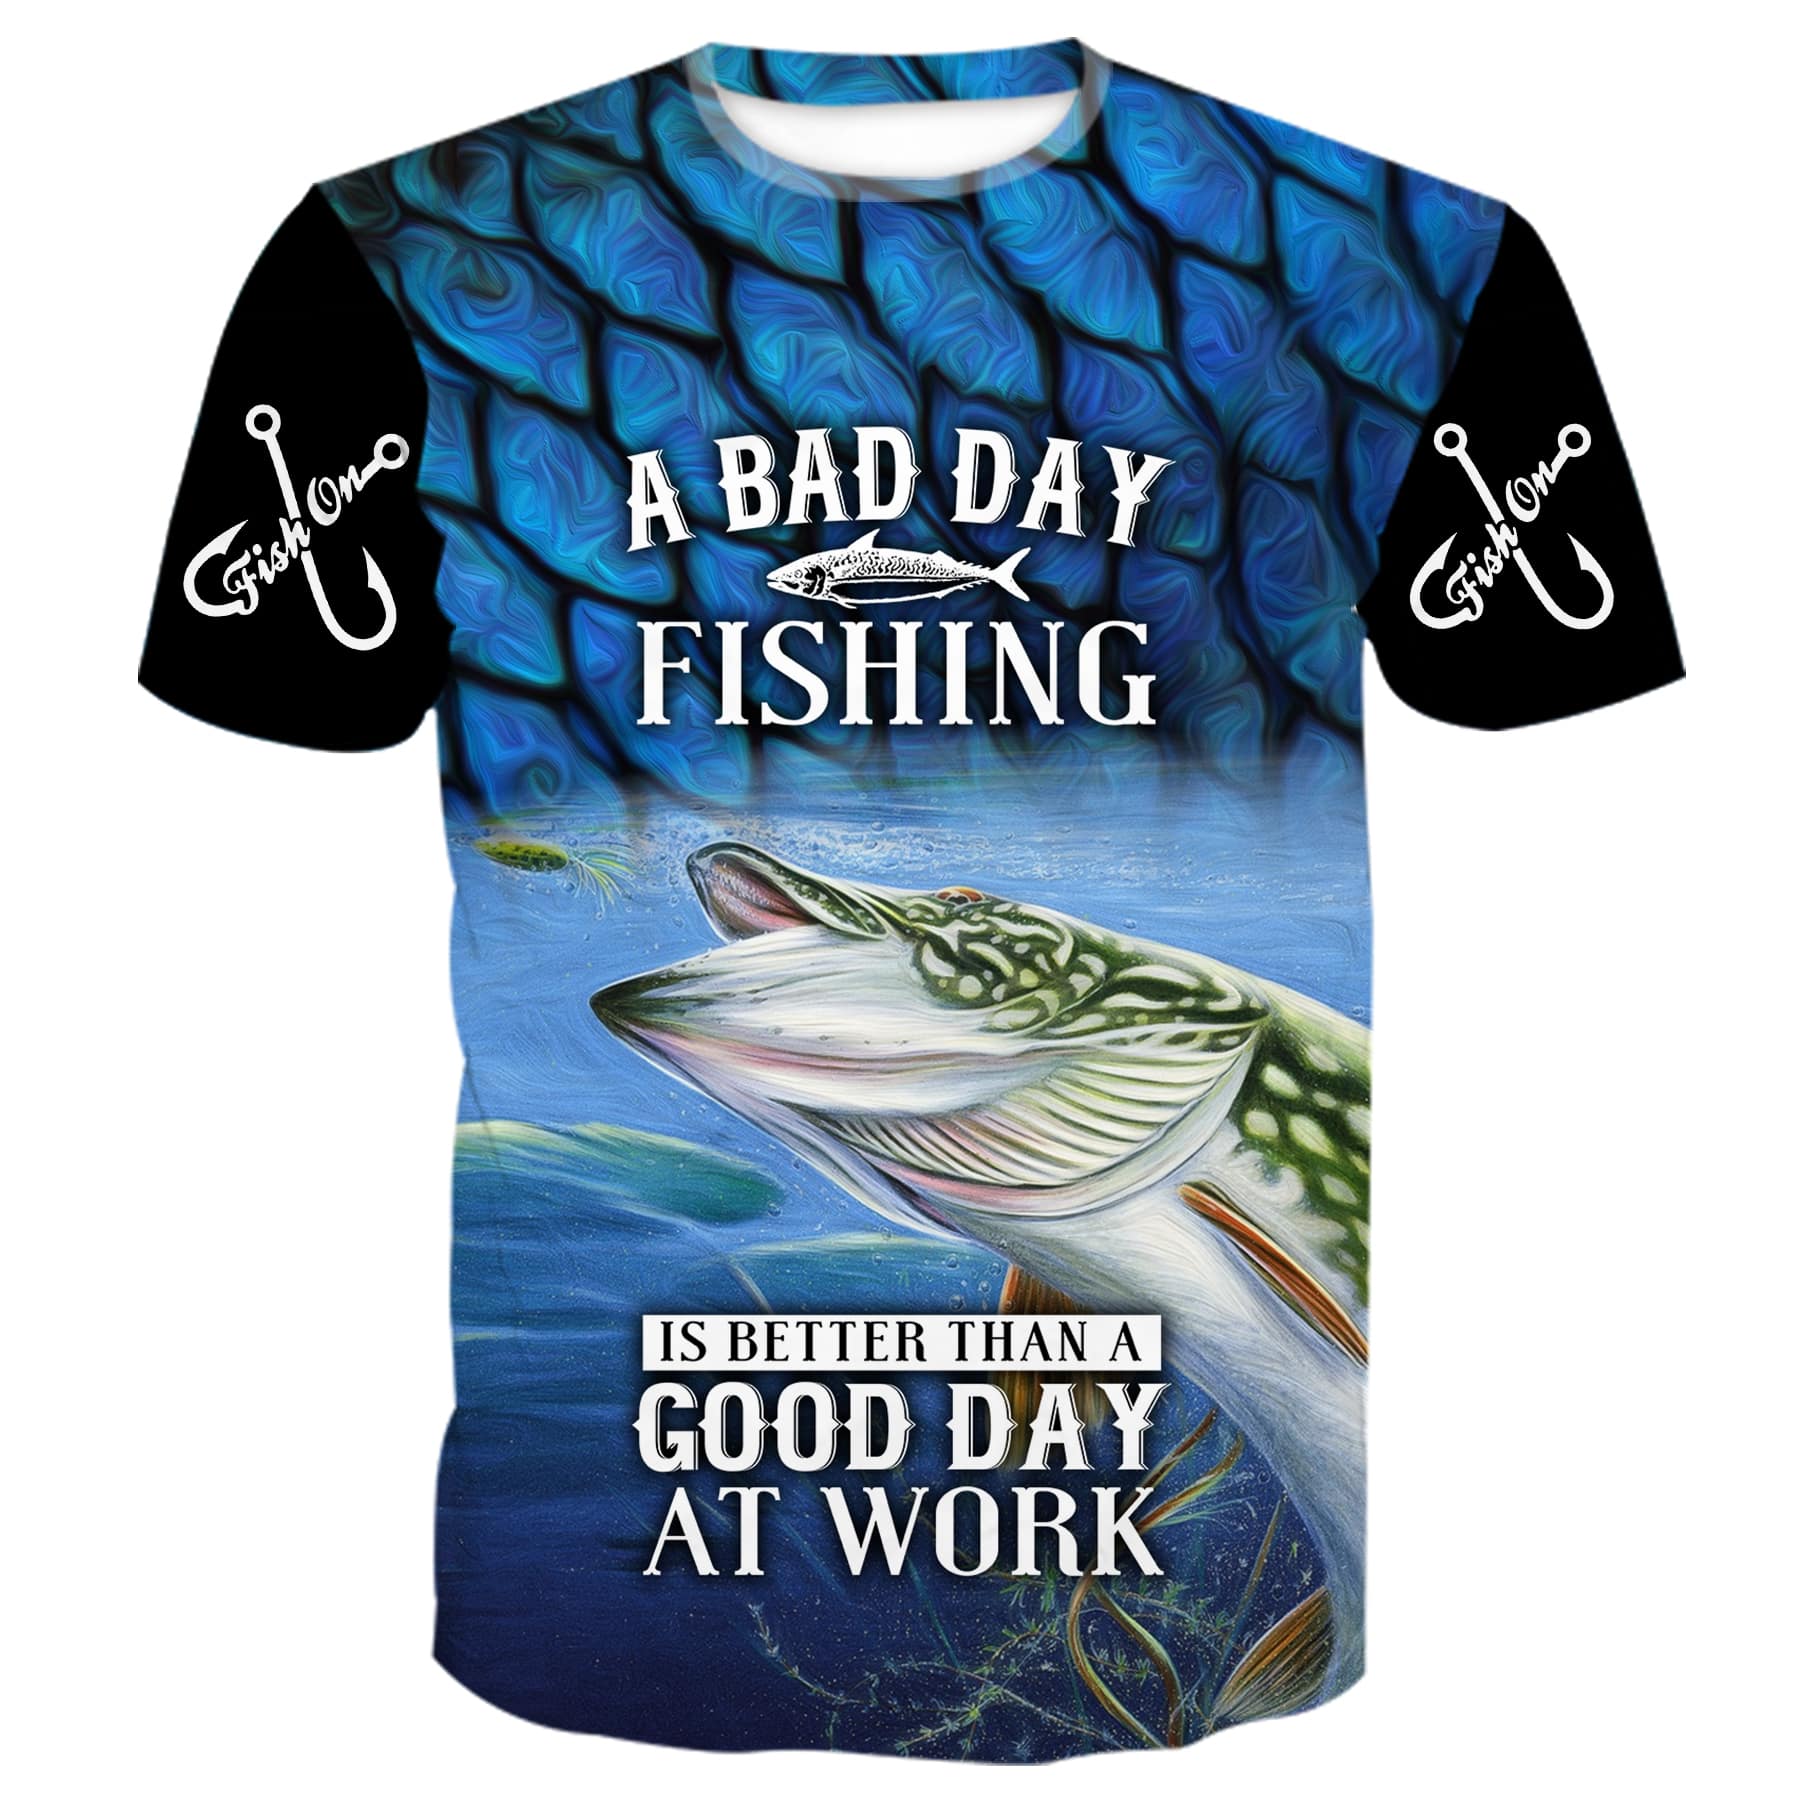 Fishing Better than work - Blue Scales Shirt